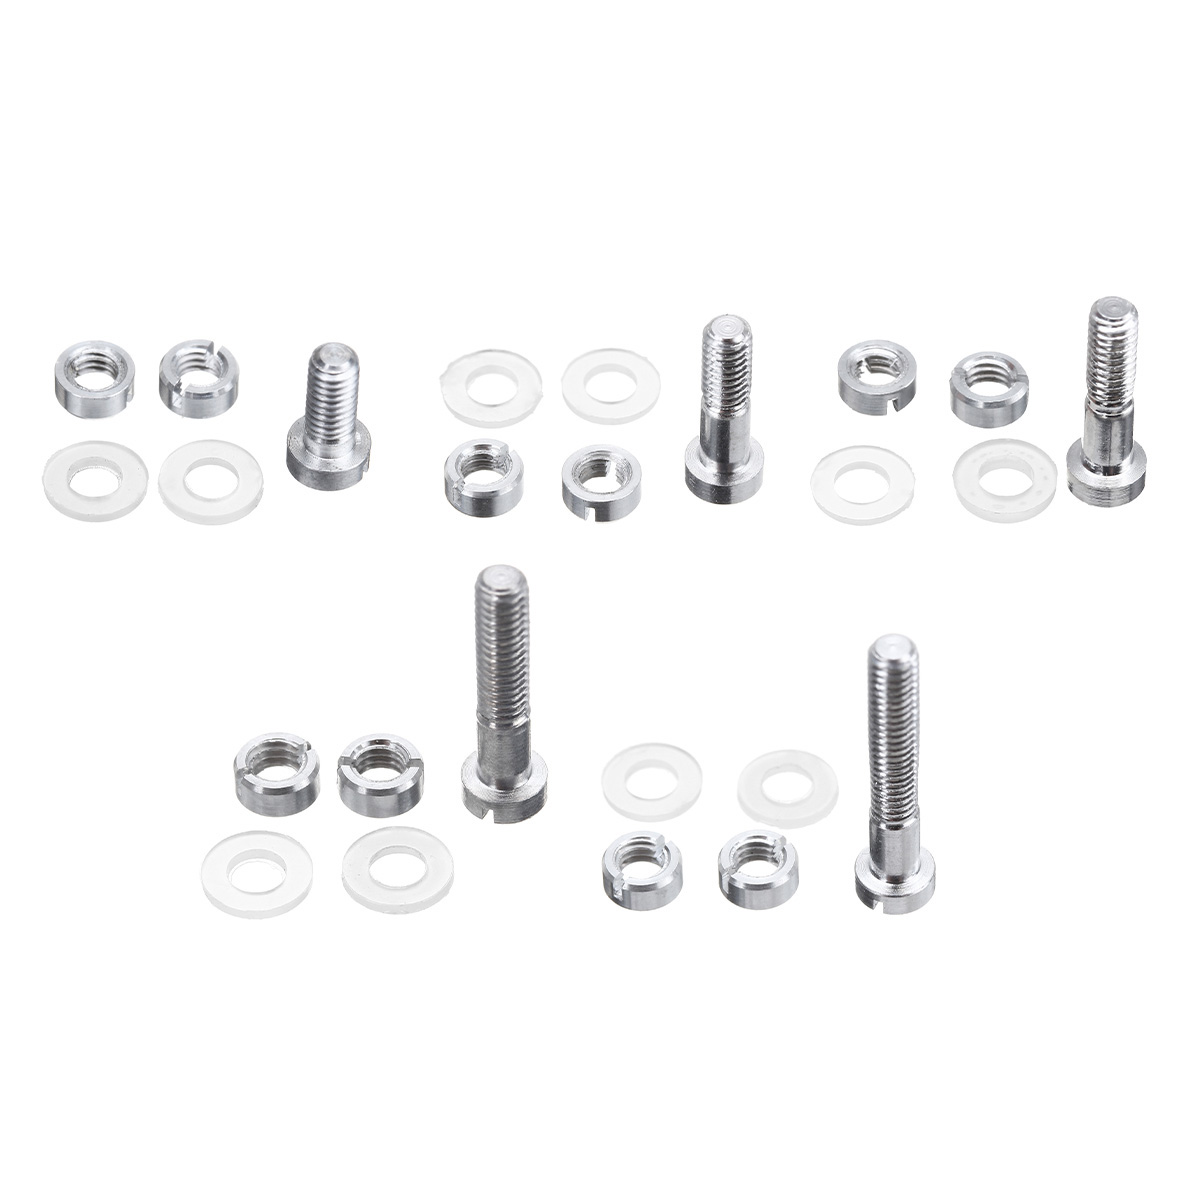 7.5mm/10.5mm/11.5mm/13.5mm/16.5mm M2.5mm Mounting Screw Set For Record Player 17